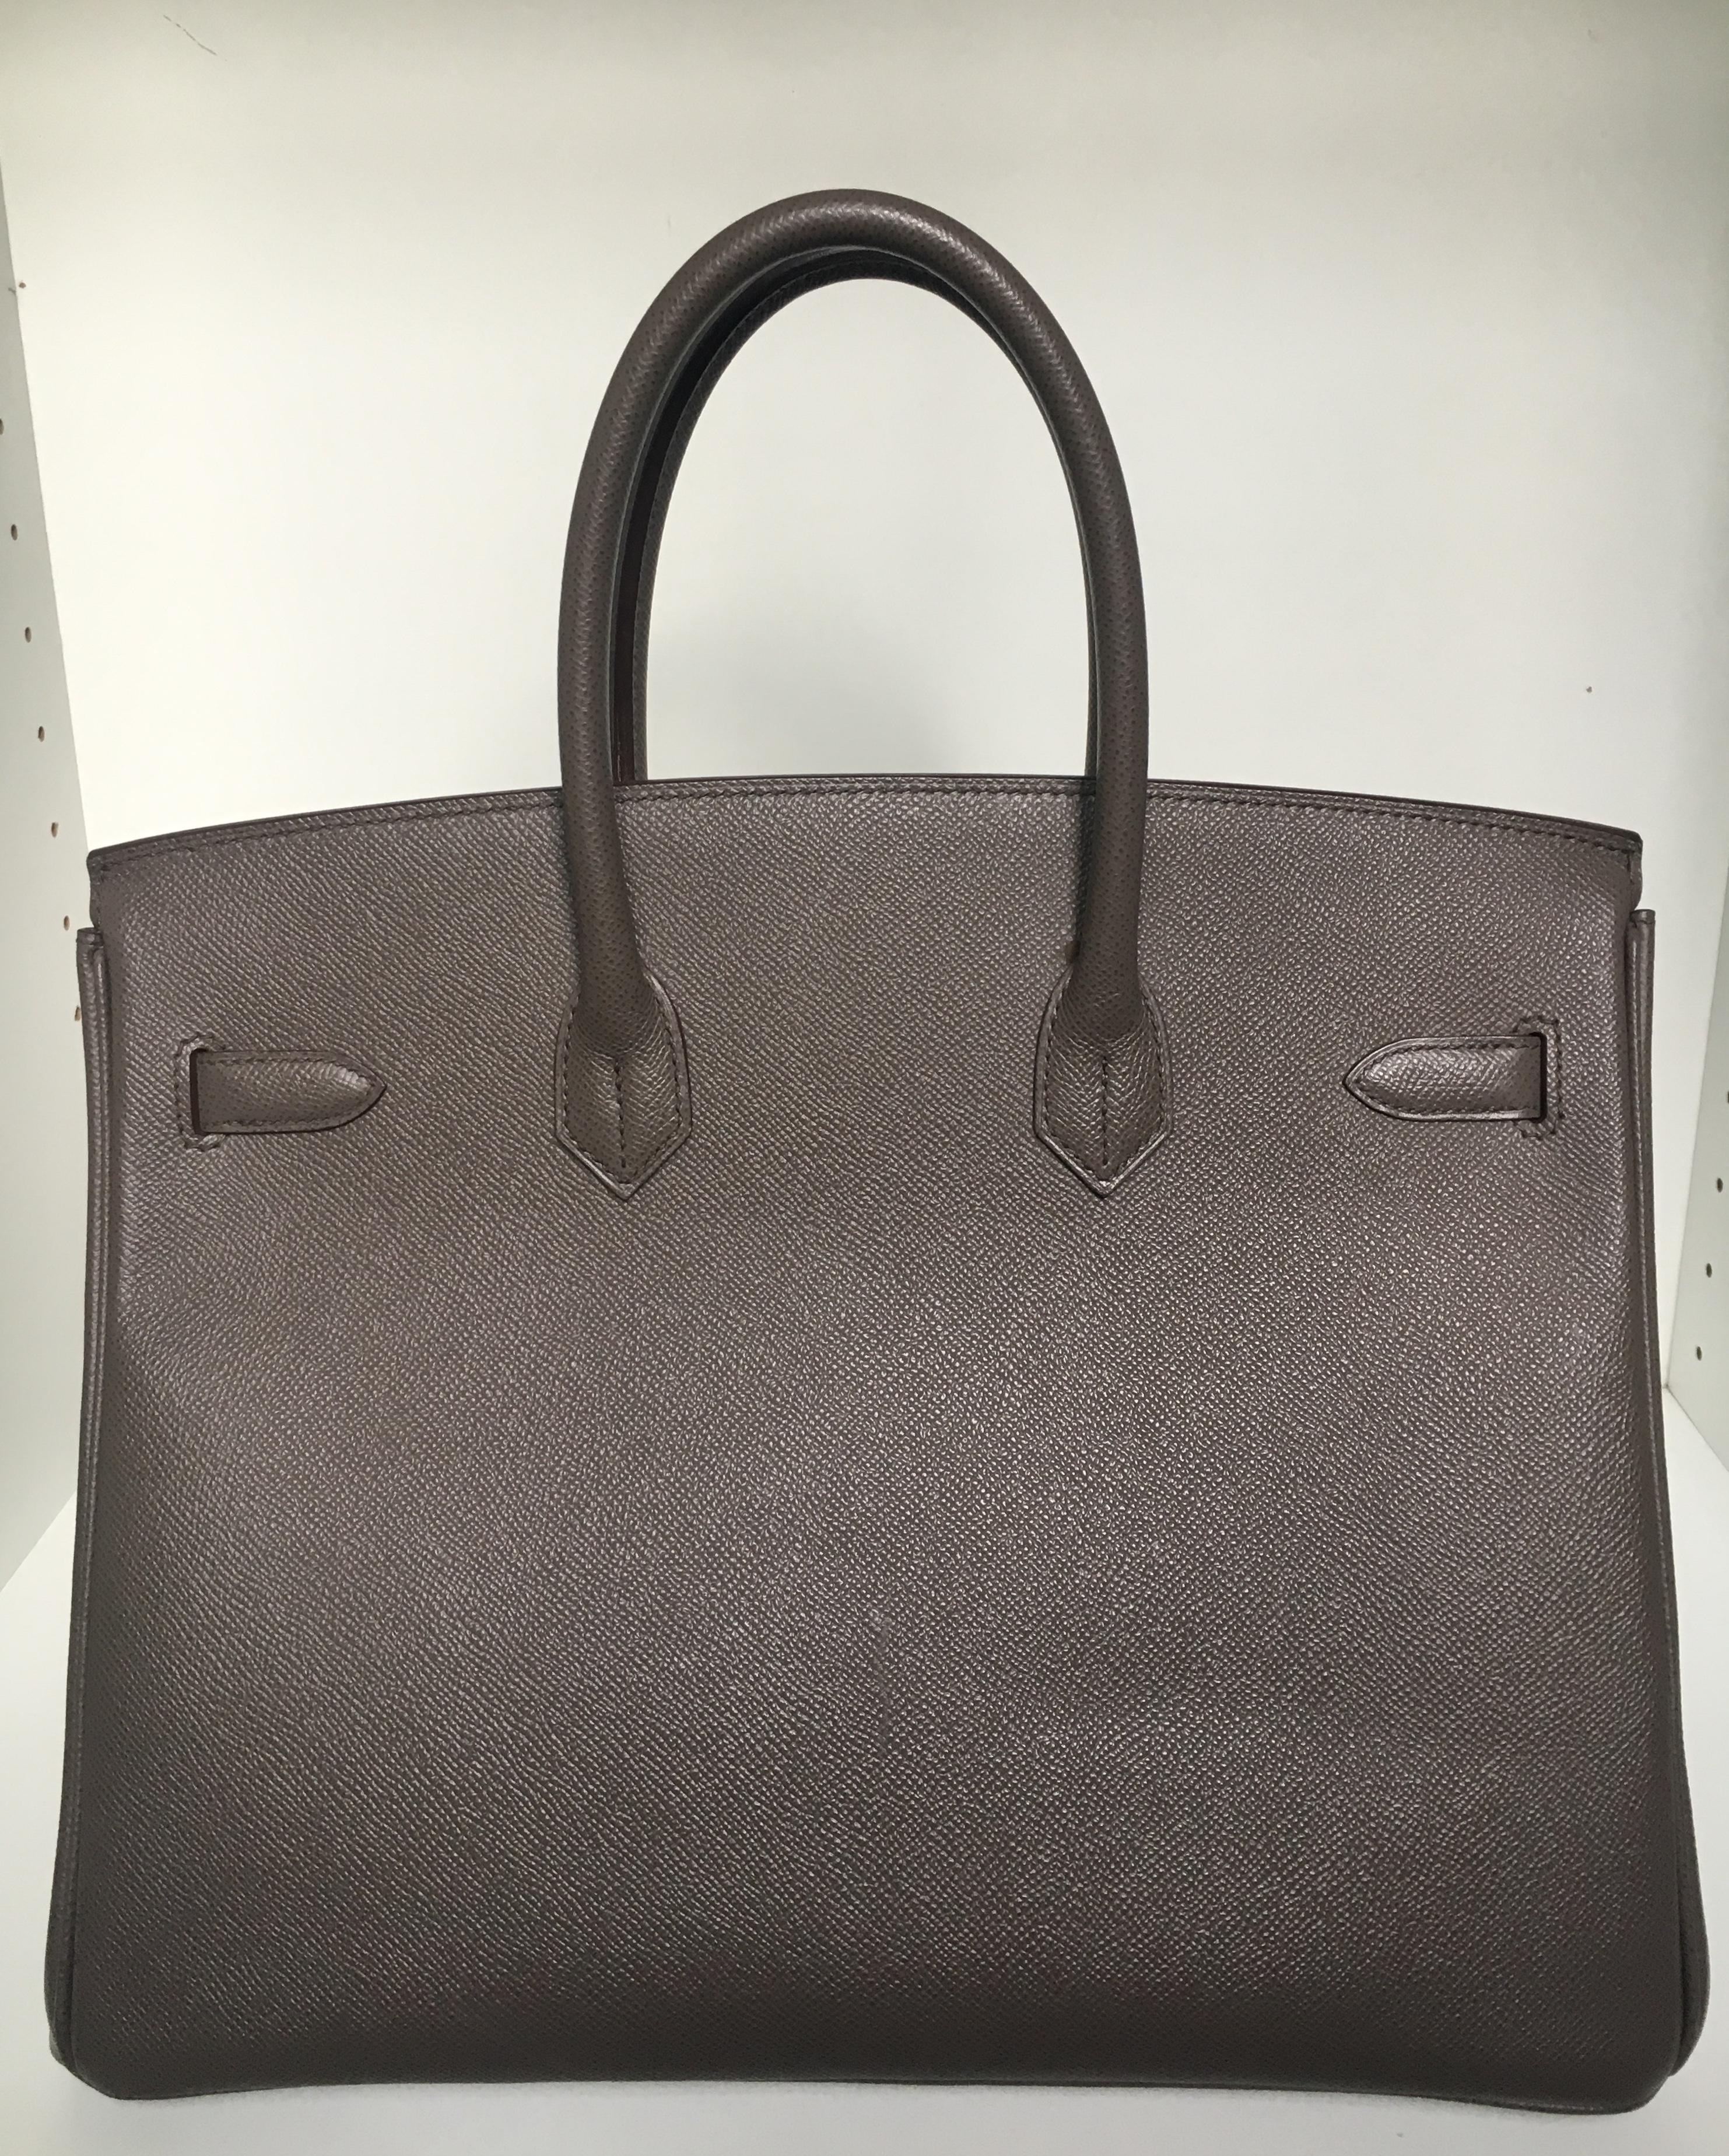 The iconic Hermes Birkin 35 cm handbag in gray epsom leather with cable gland, palladium-plated metal trim, double gray leather handle for hand-carry. Flap closure. Gray leather interior lining, zipped pocket, patch pocket. Sold with zipper, key,